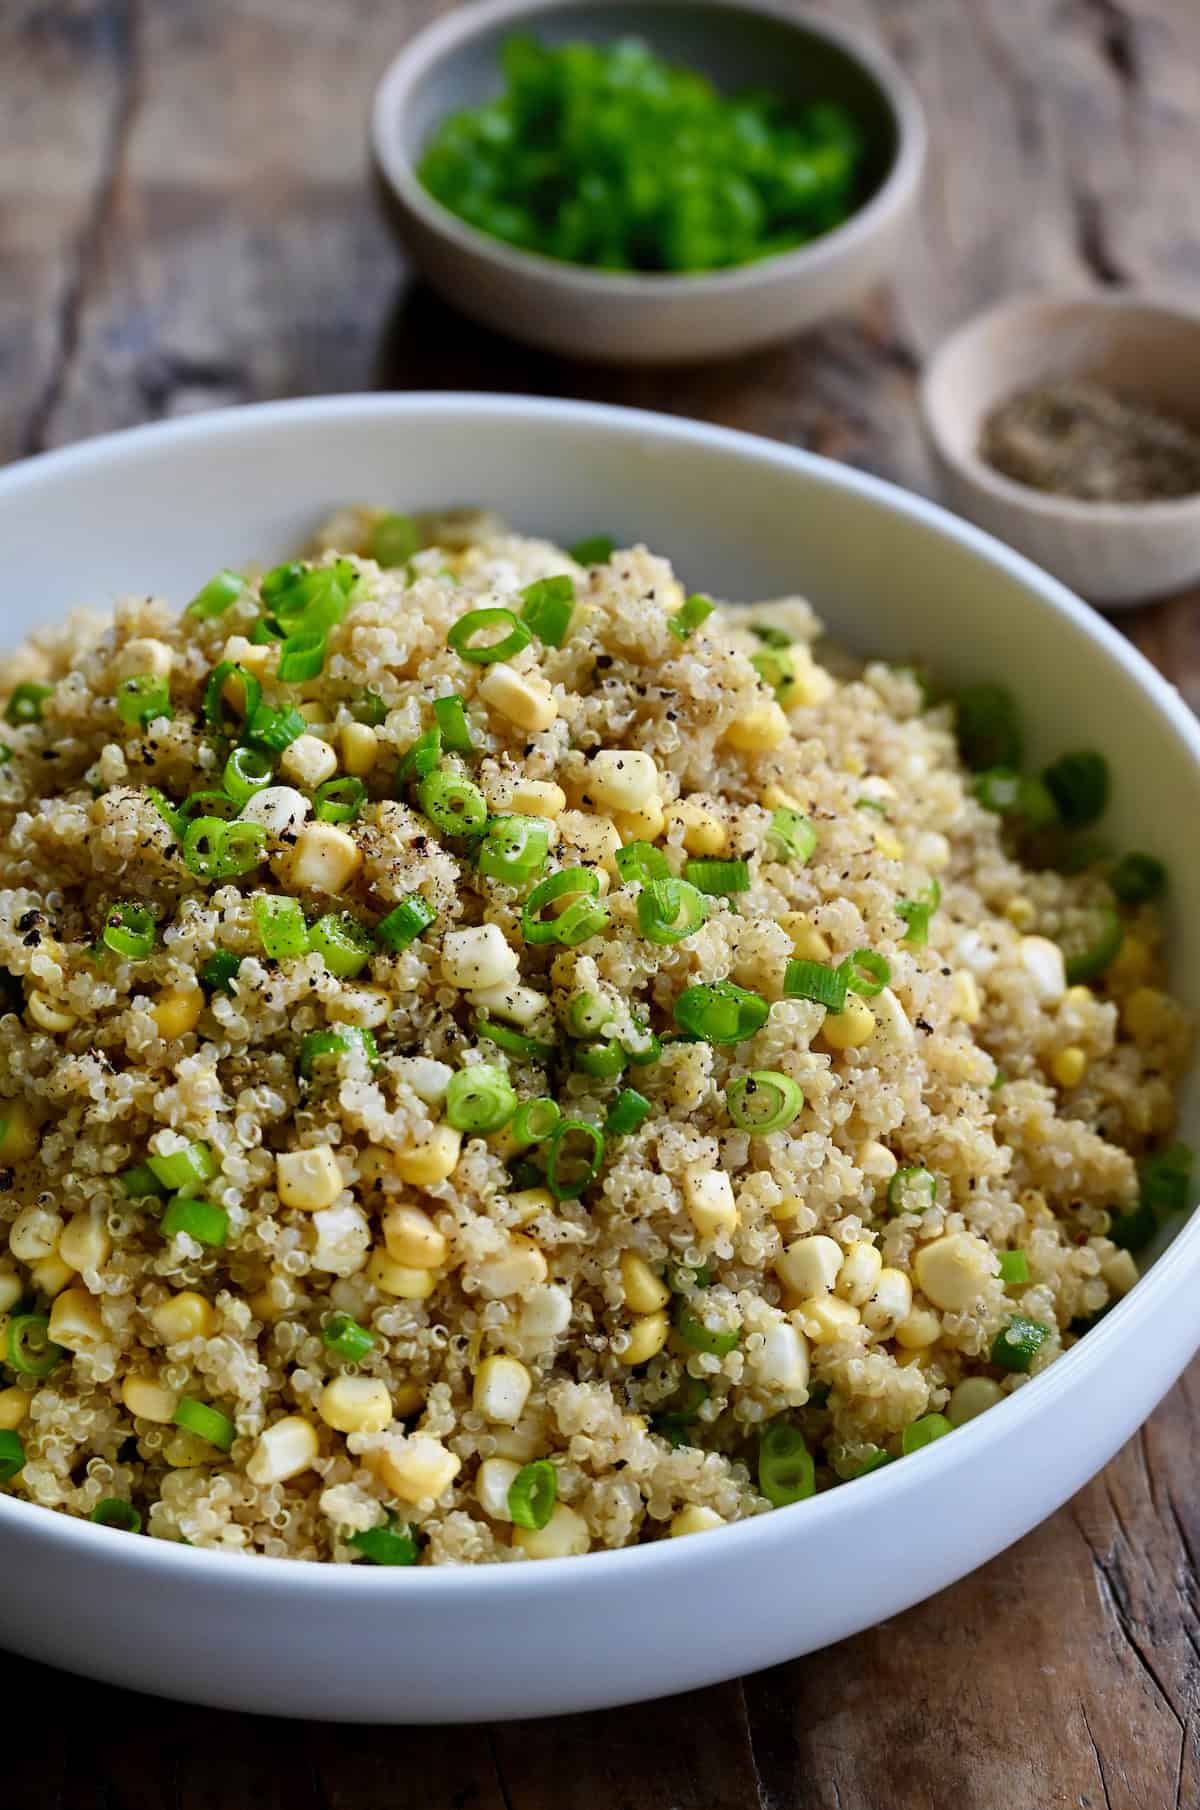 Quinoa with corn and scallions in a large white serving bowl. Small bowls of sliced scallions and ground black pepper are behind the serving bowl.